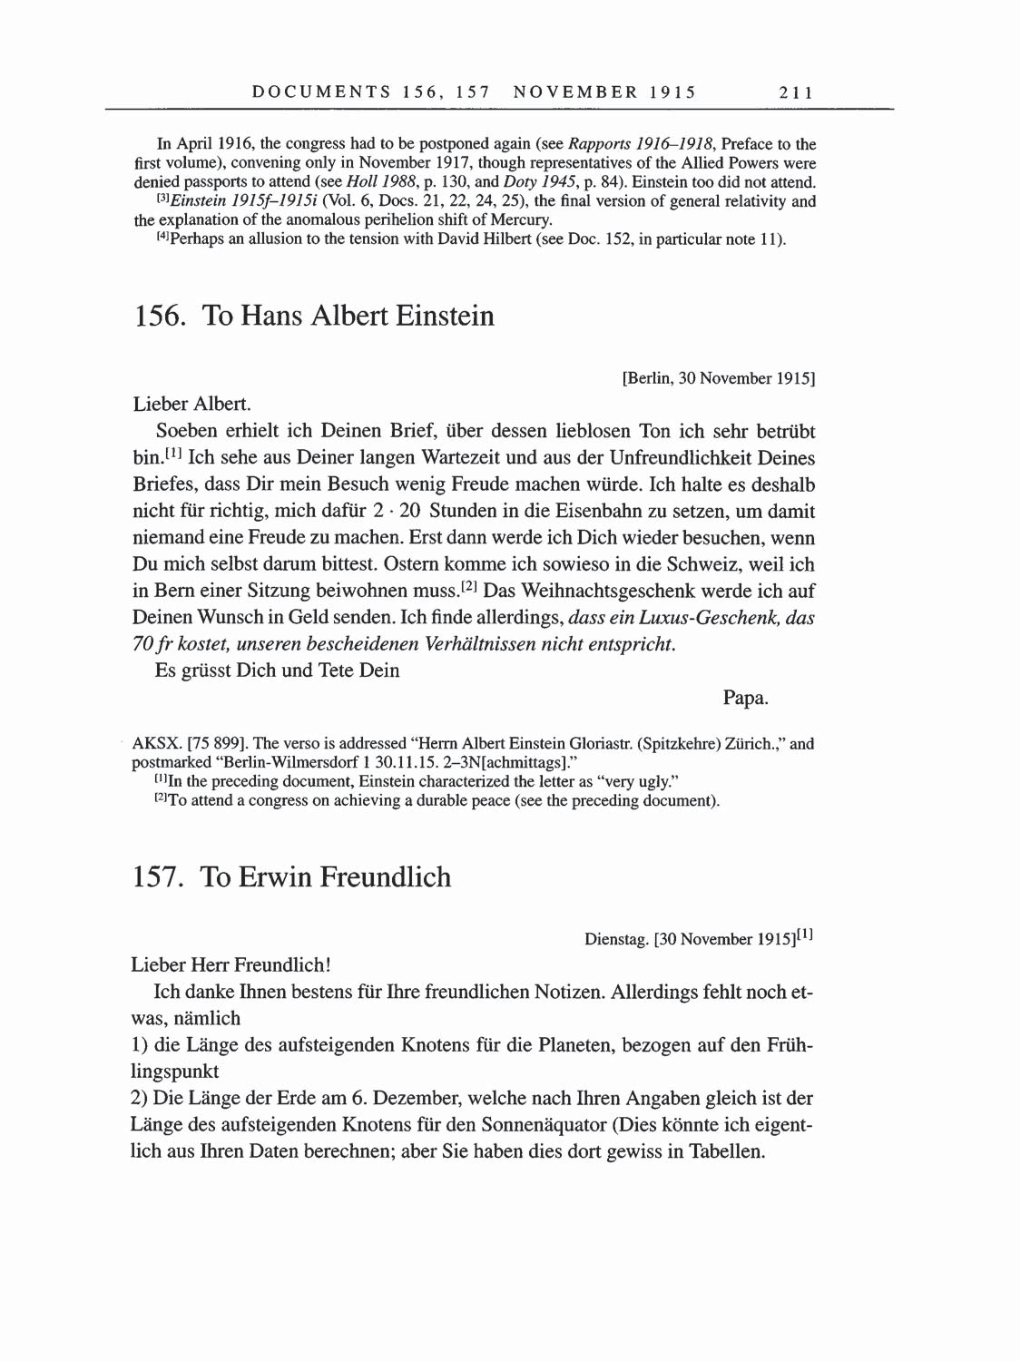 Volume 8, Part A: The Berlin Years: Correspondence 1914-1917 page 211